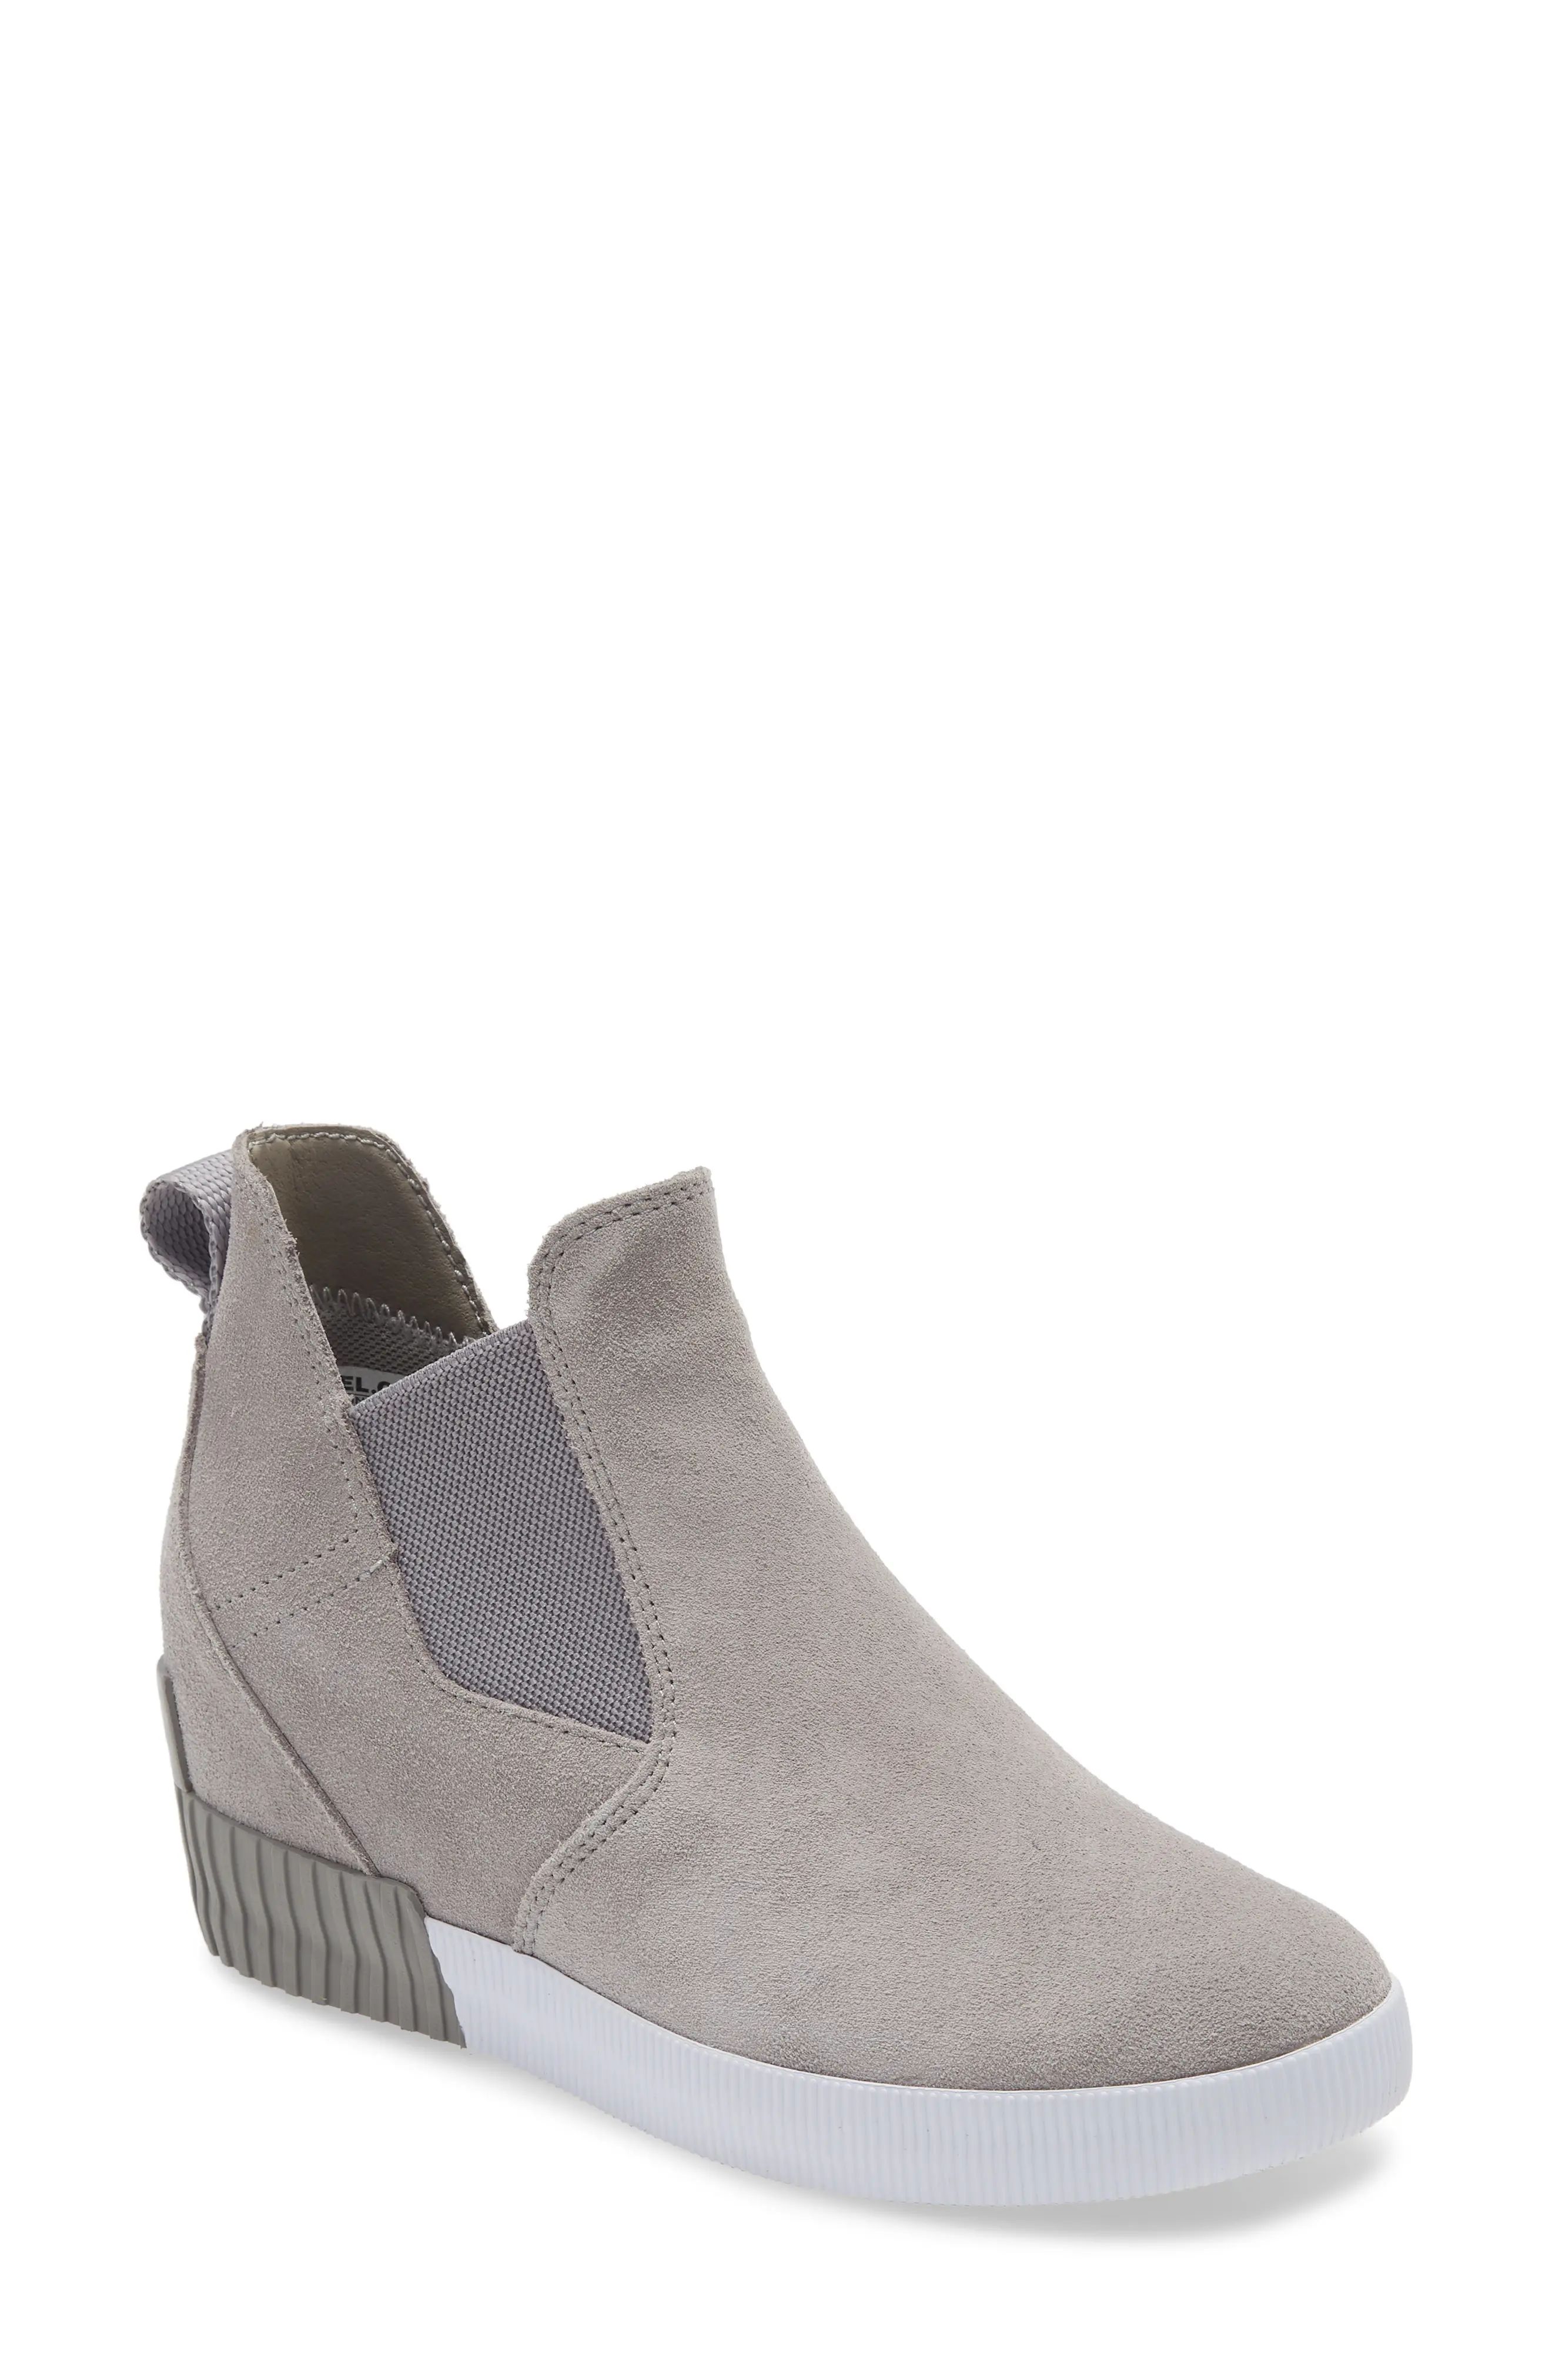 SOREL Out N About Slip-On Wedge Shoe in Chrome Grey White at Nordstrom, Size 11 | Nordstrom